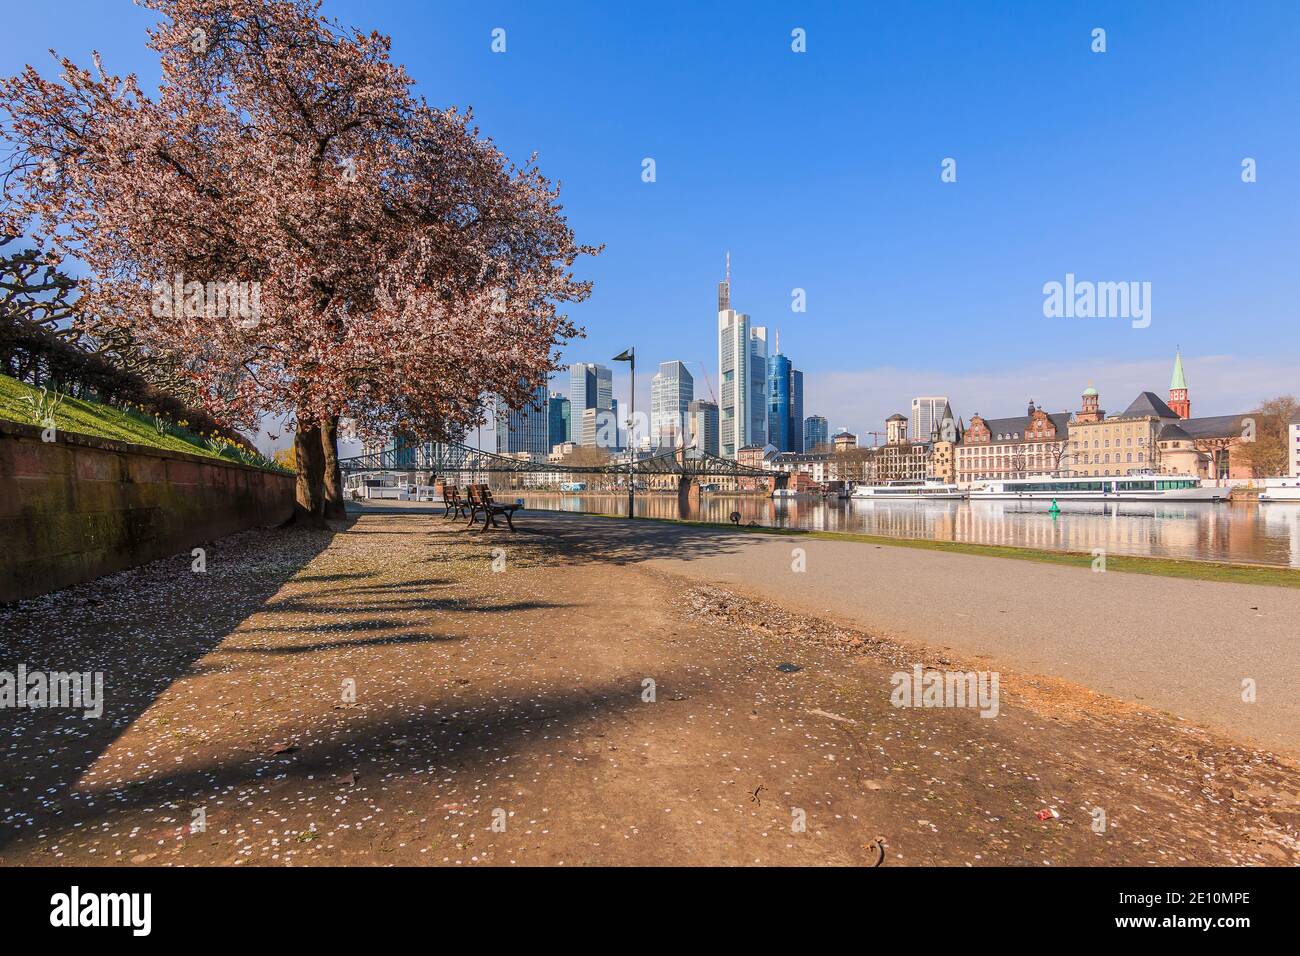 Bank on the river Main With a view of the skyline of Frankfurt. Park and city view in sunshine. Tree with blossom and bench along the path in spring. Stock Photo